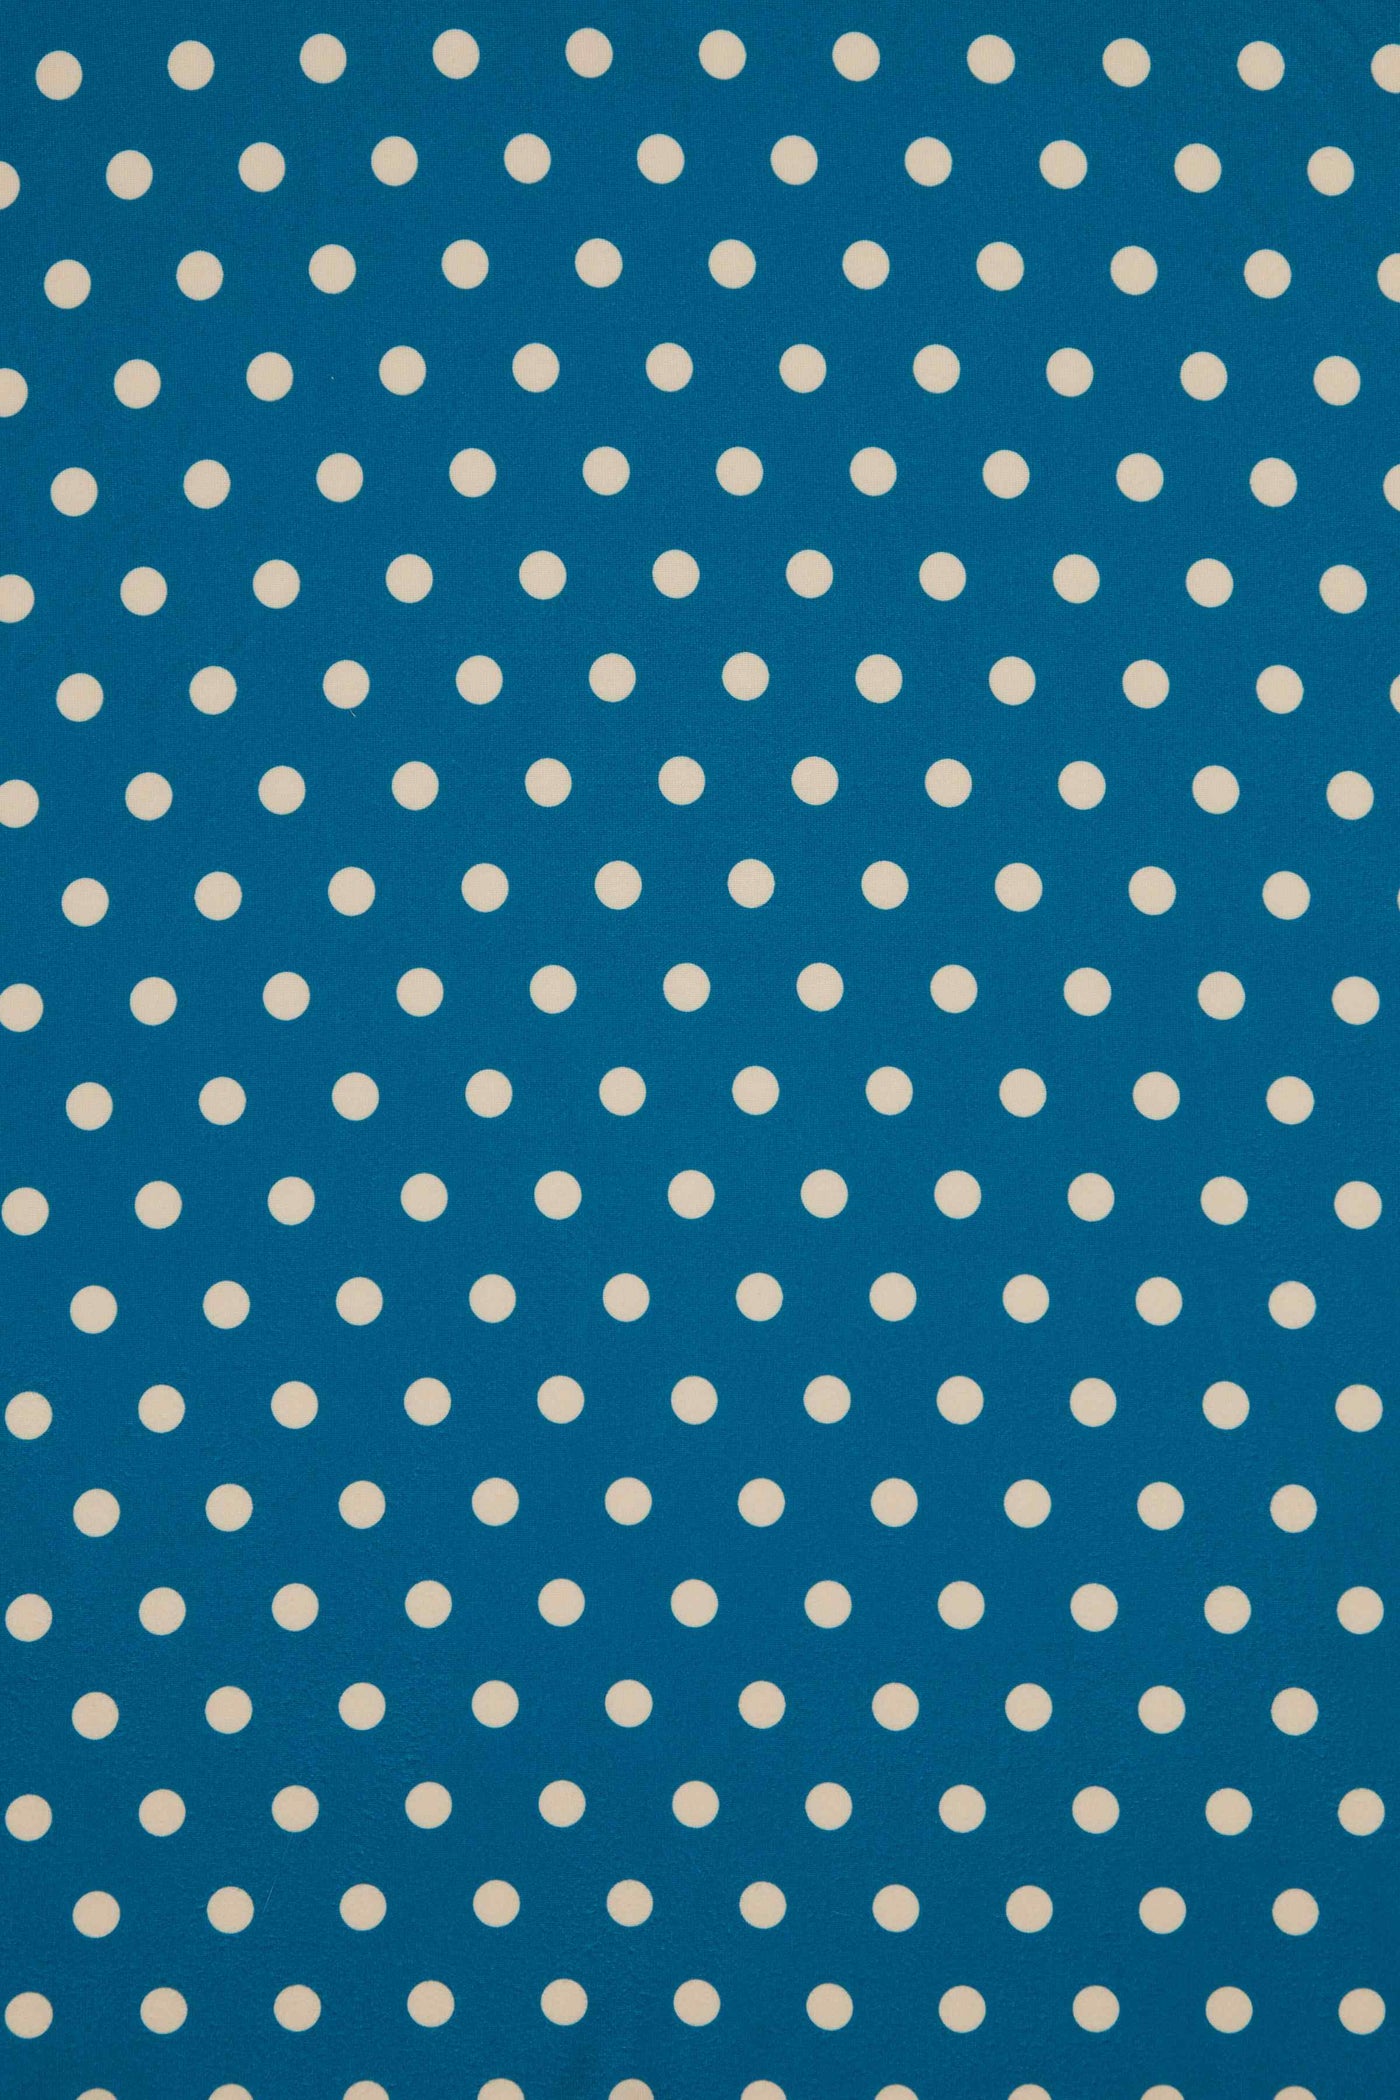 Close Up View of Peacock Blue and Cream Polka Dot Wrap Dress